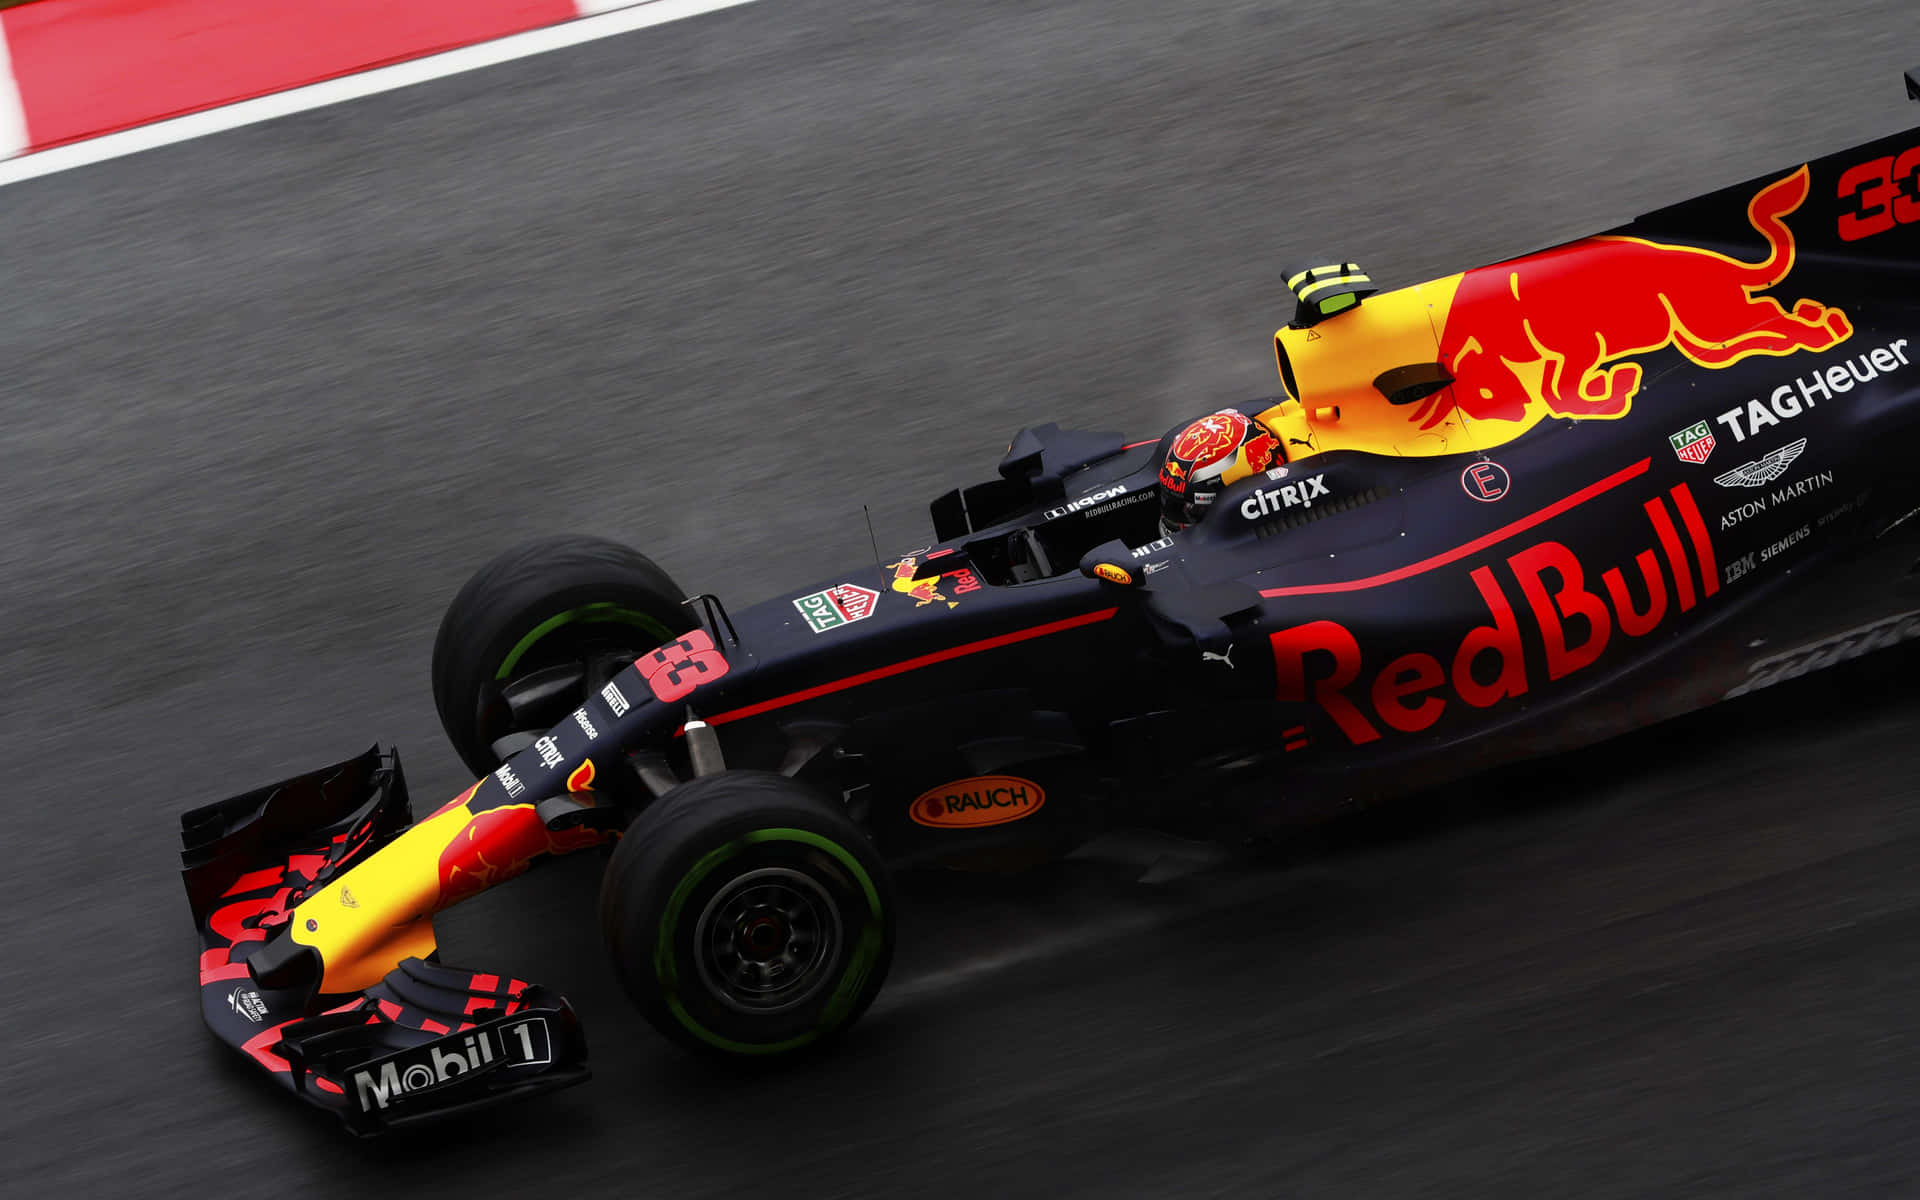 Max Verstappen racing on the track